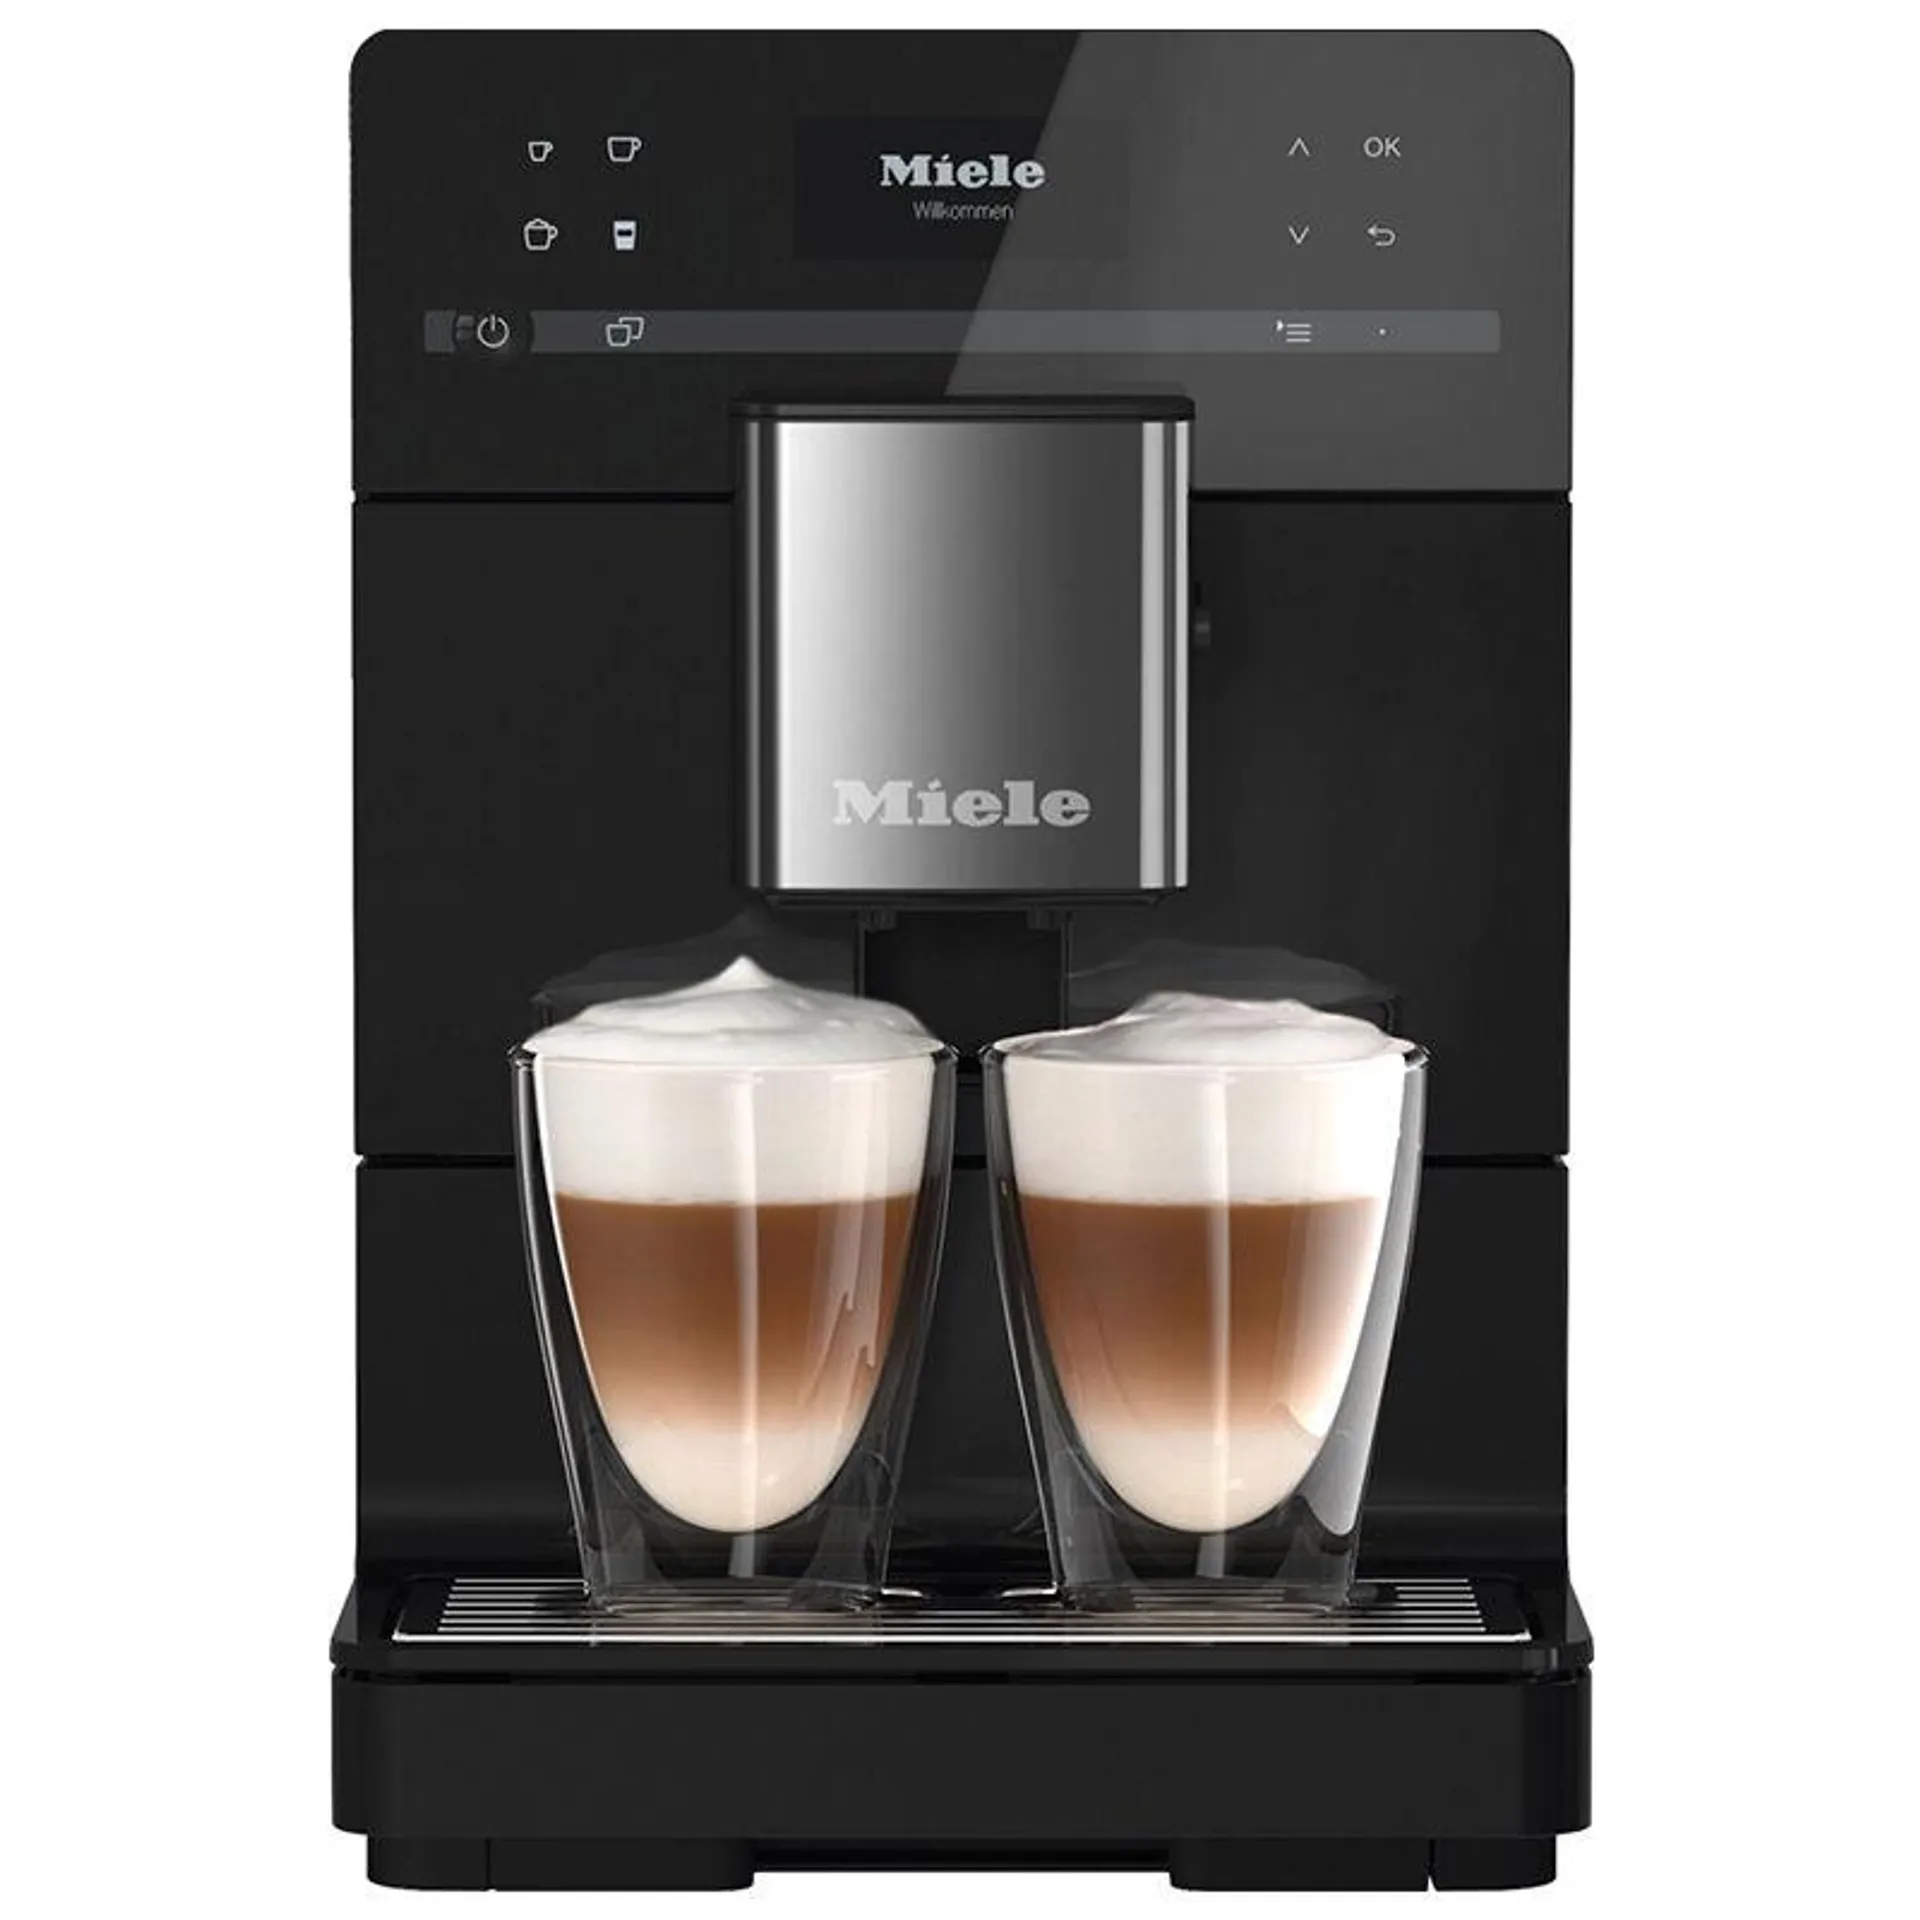 Miele MilkPerfection Countertop Coffee Machine with AromaticSystem, OneTouch for 2 Convenient Cleaning and Maintenance Programs-Obsidian Black